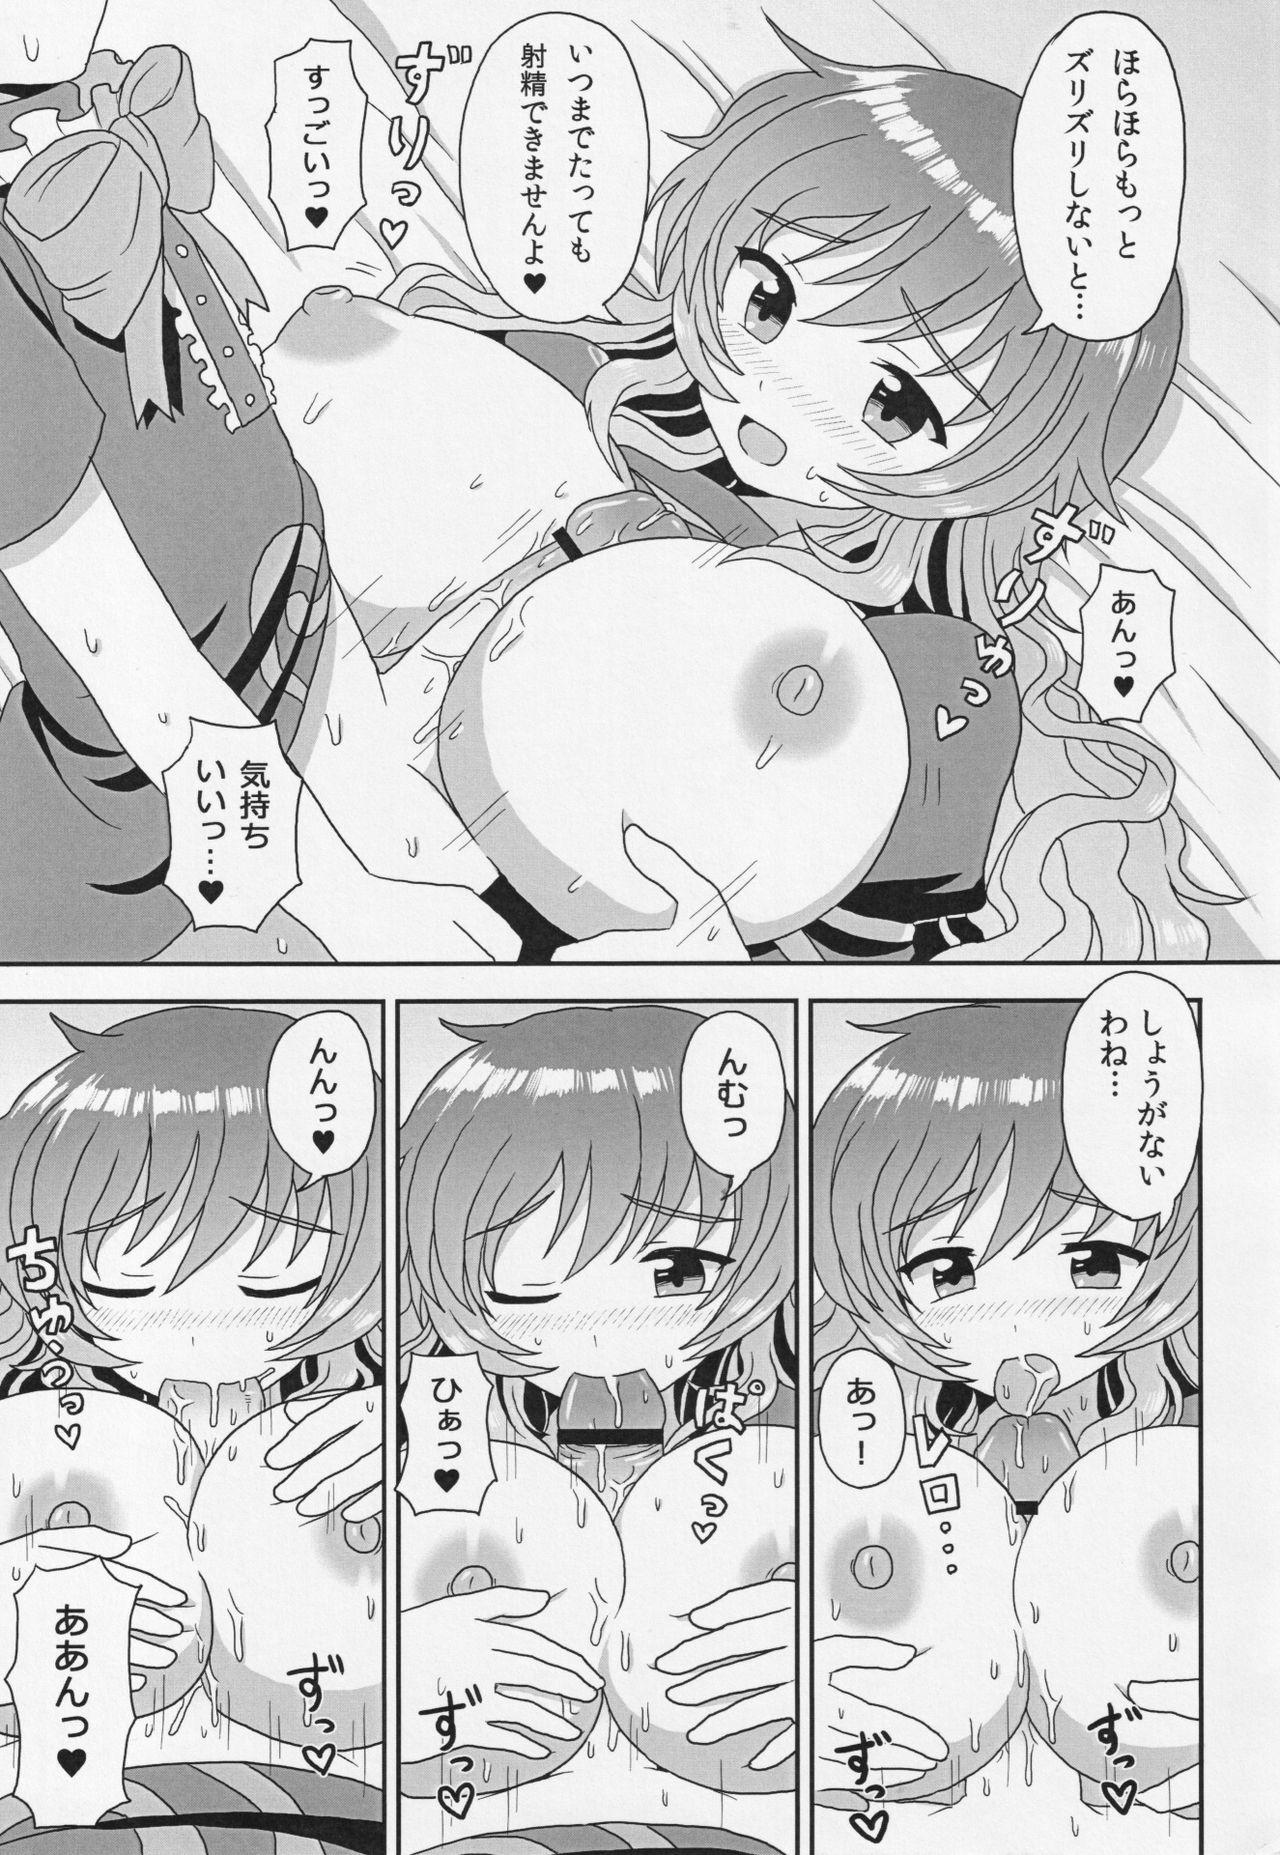 Straight Porn HH+ - Touhou project Exgf - Page 6